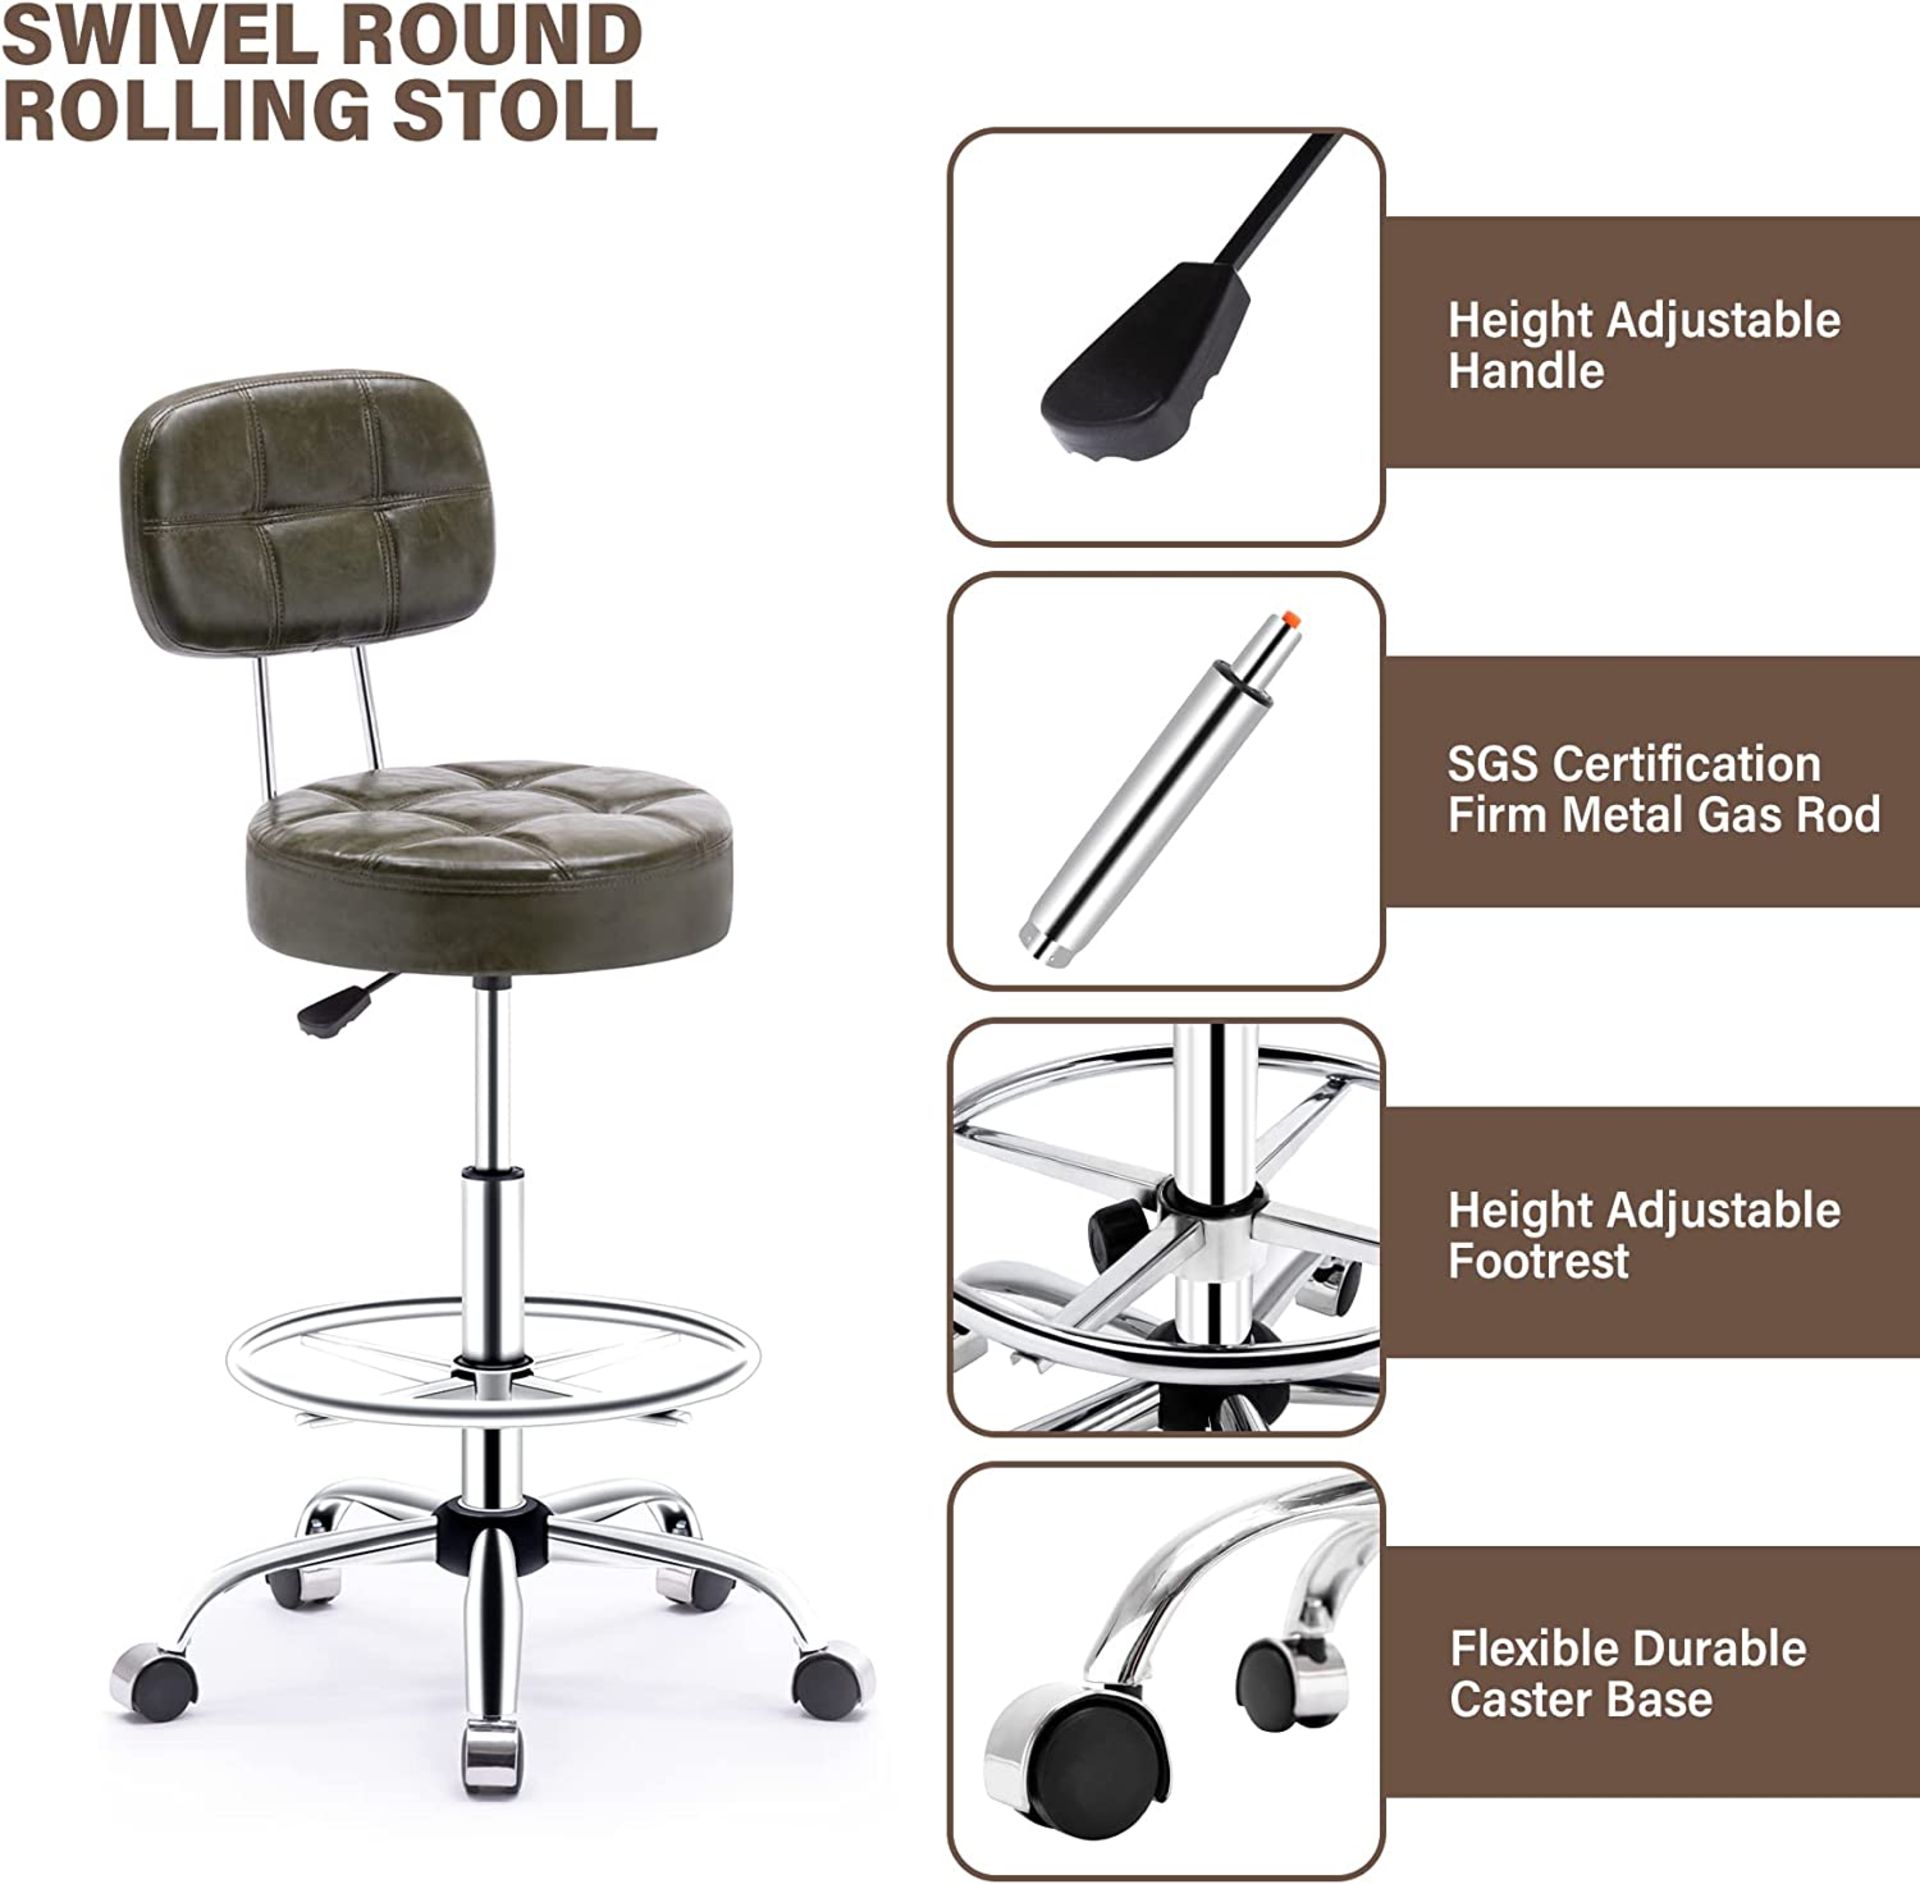 NEW Rolling stool with High Backrest and Adjustable Footrest,Pu Leather Massage Stool Ergonomic - Image 2 of 4